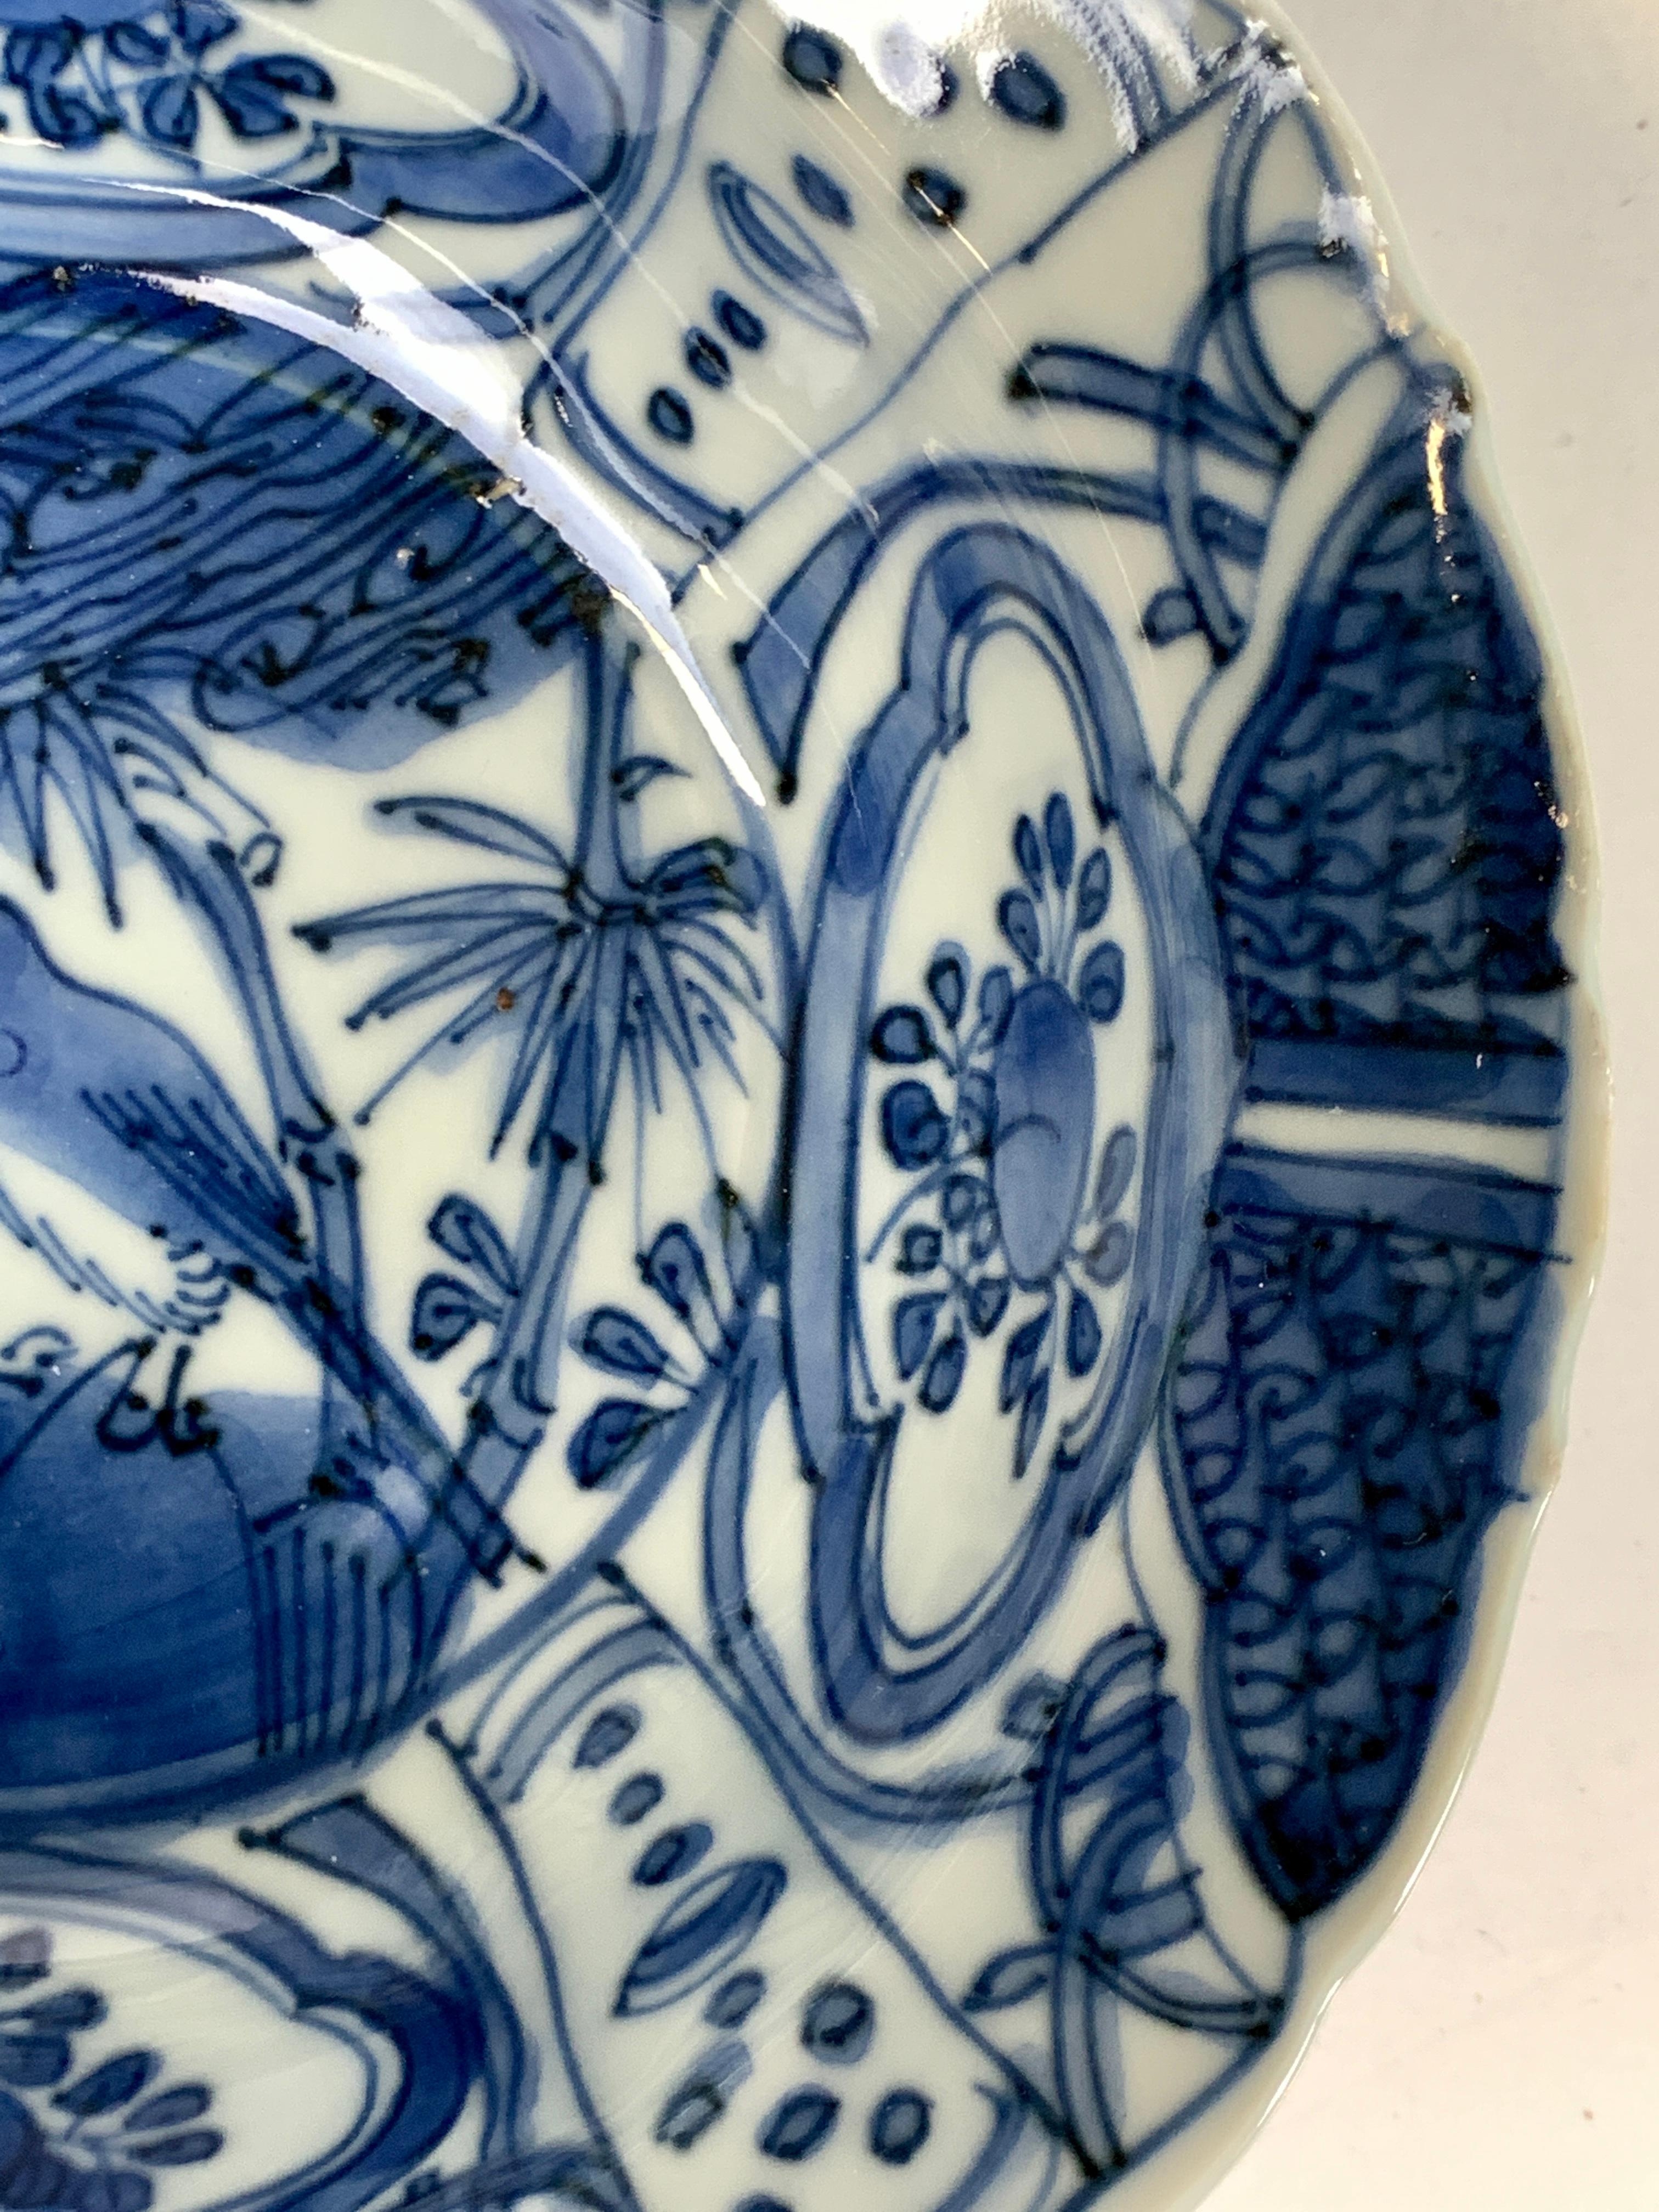 We are pleased to offer this small gem of Chinese blue and white porcelain. Our 